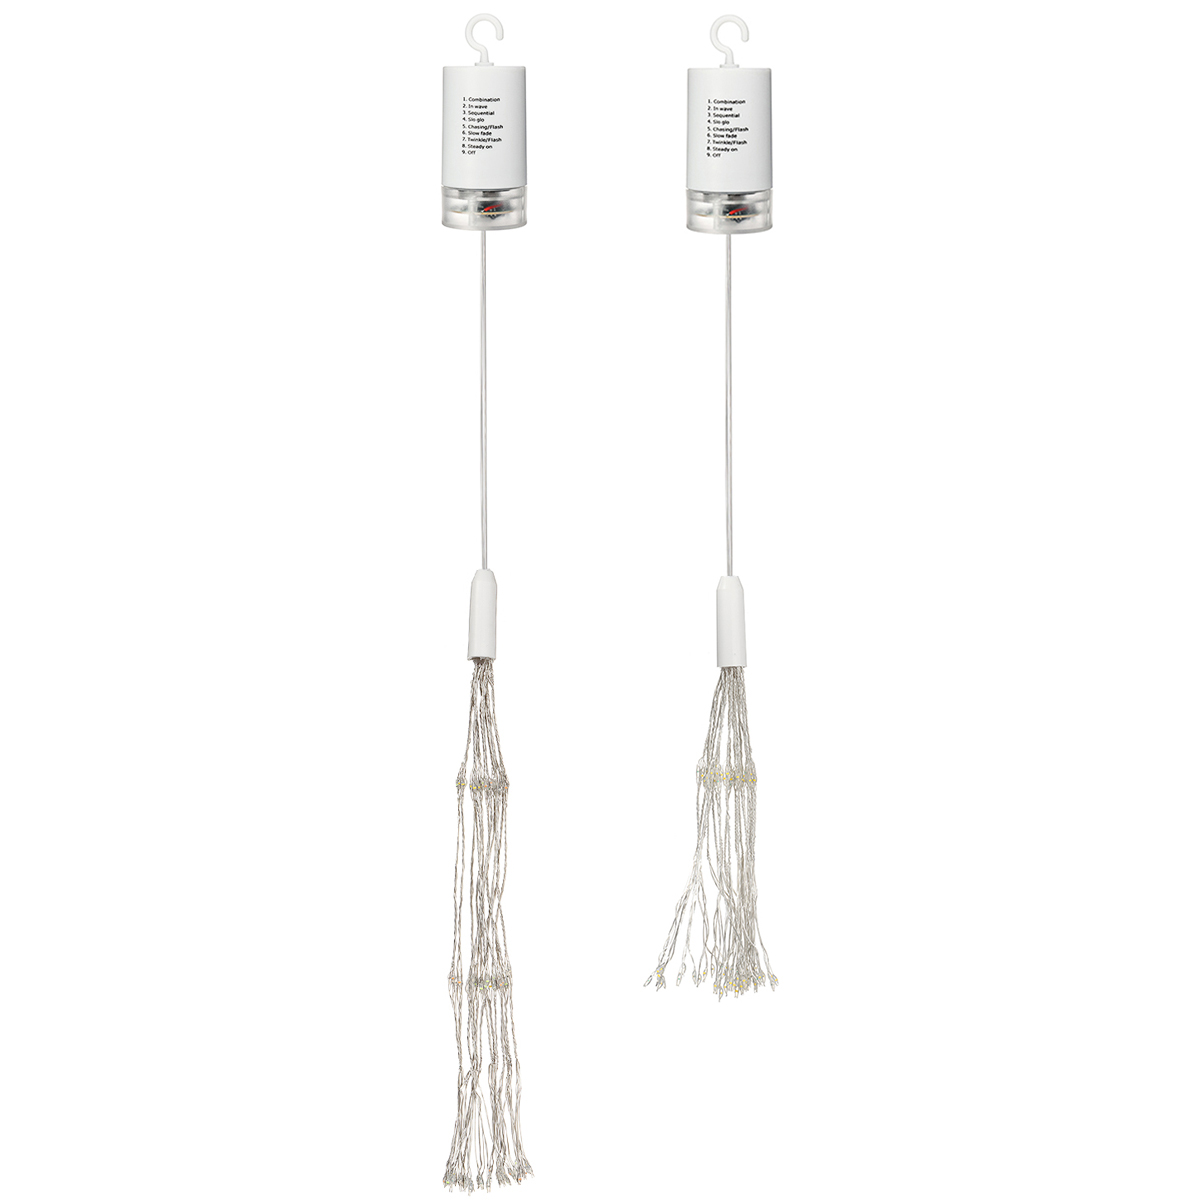 Battery-Operated-198LED-Dandelion-Hanging-String-Light-Silver-Wire-8-Mode-Dimmable-Christmas-Decor-1380686-7